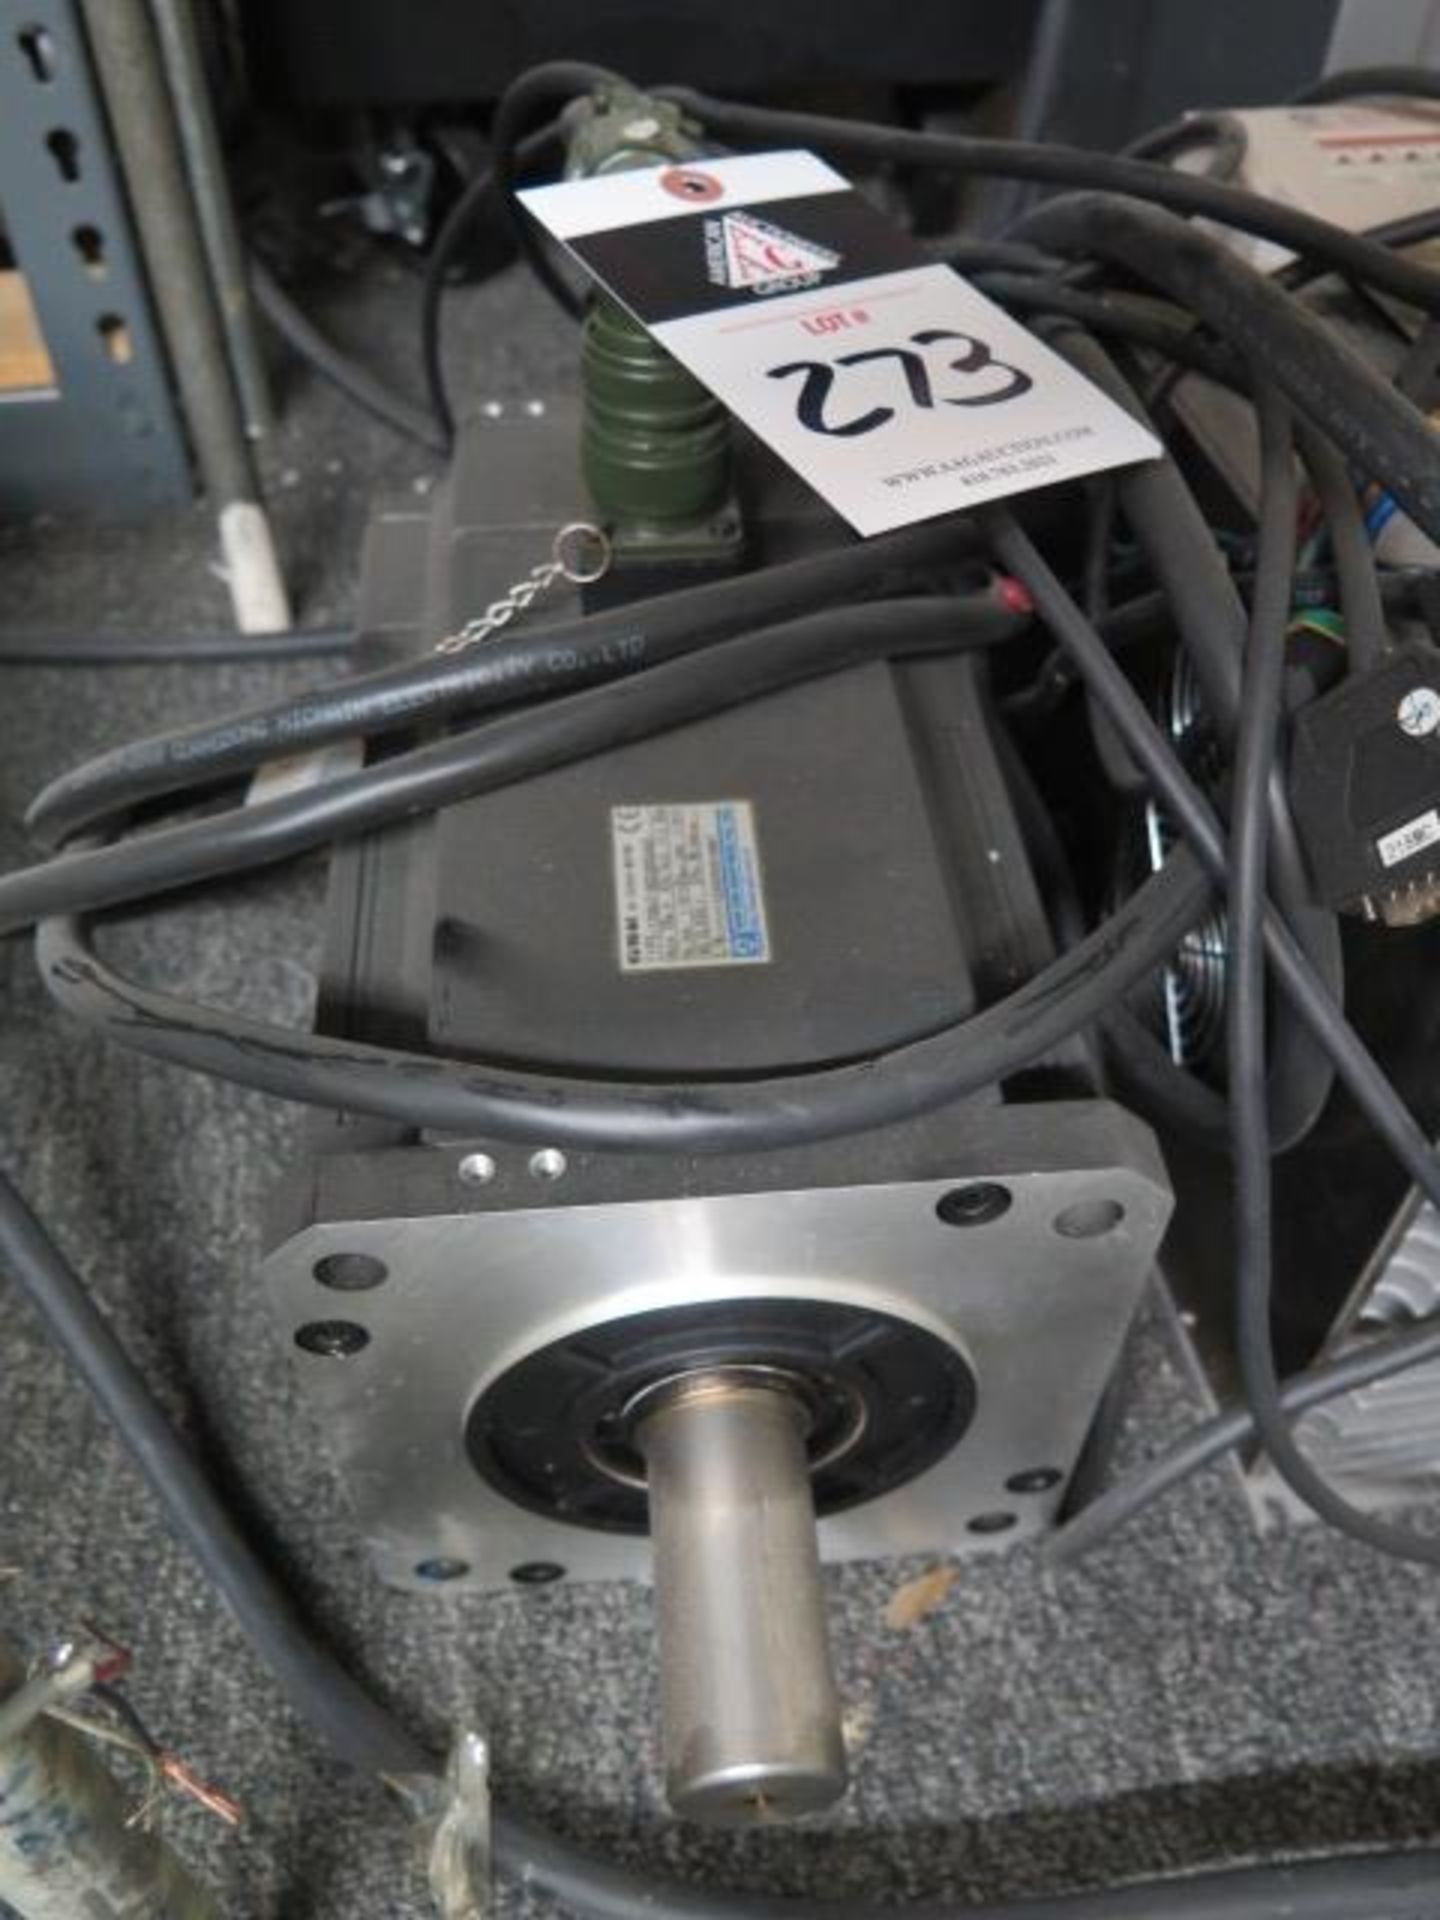 AC Spindle Drive Controller and Spindle Drive Motor (MATCHED SET) (SOLD AS-IS - NO WARRANTY) - Image 3 of 3